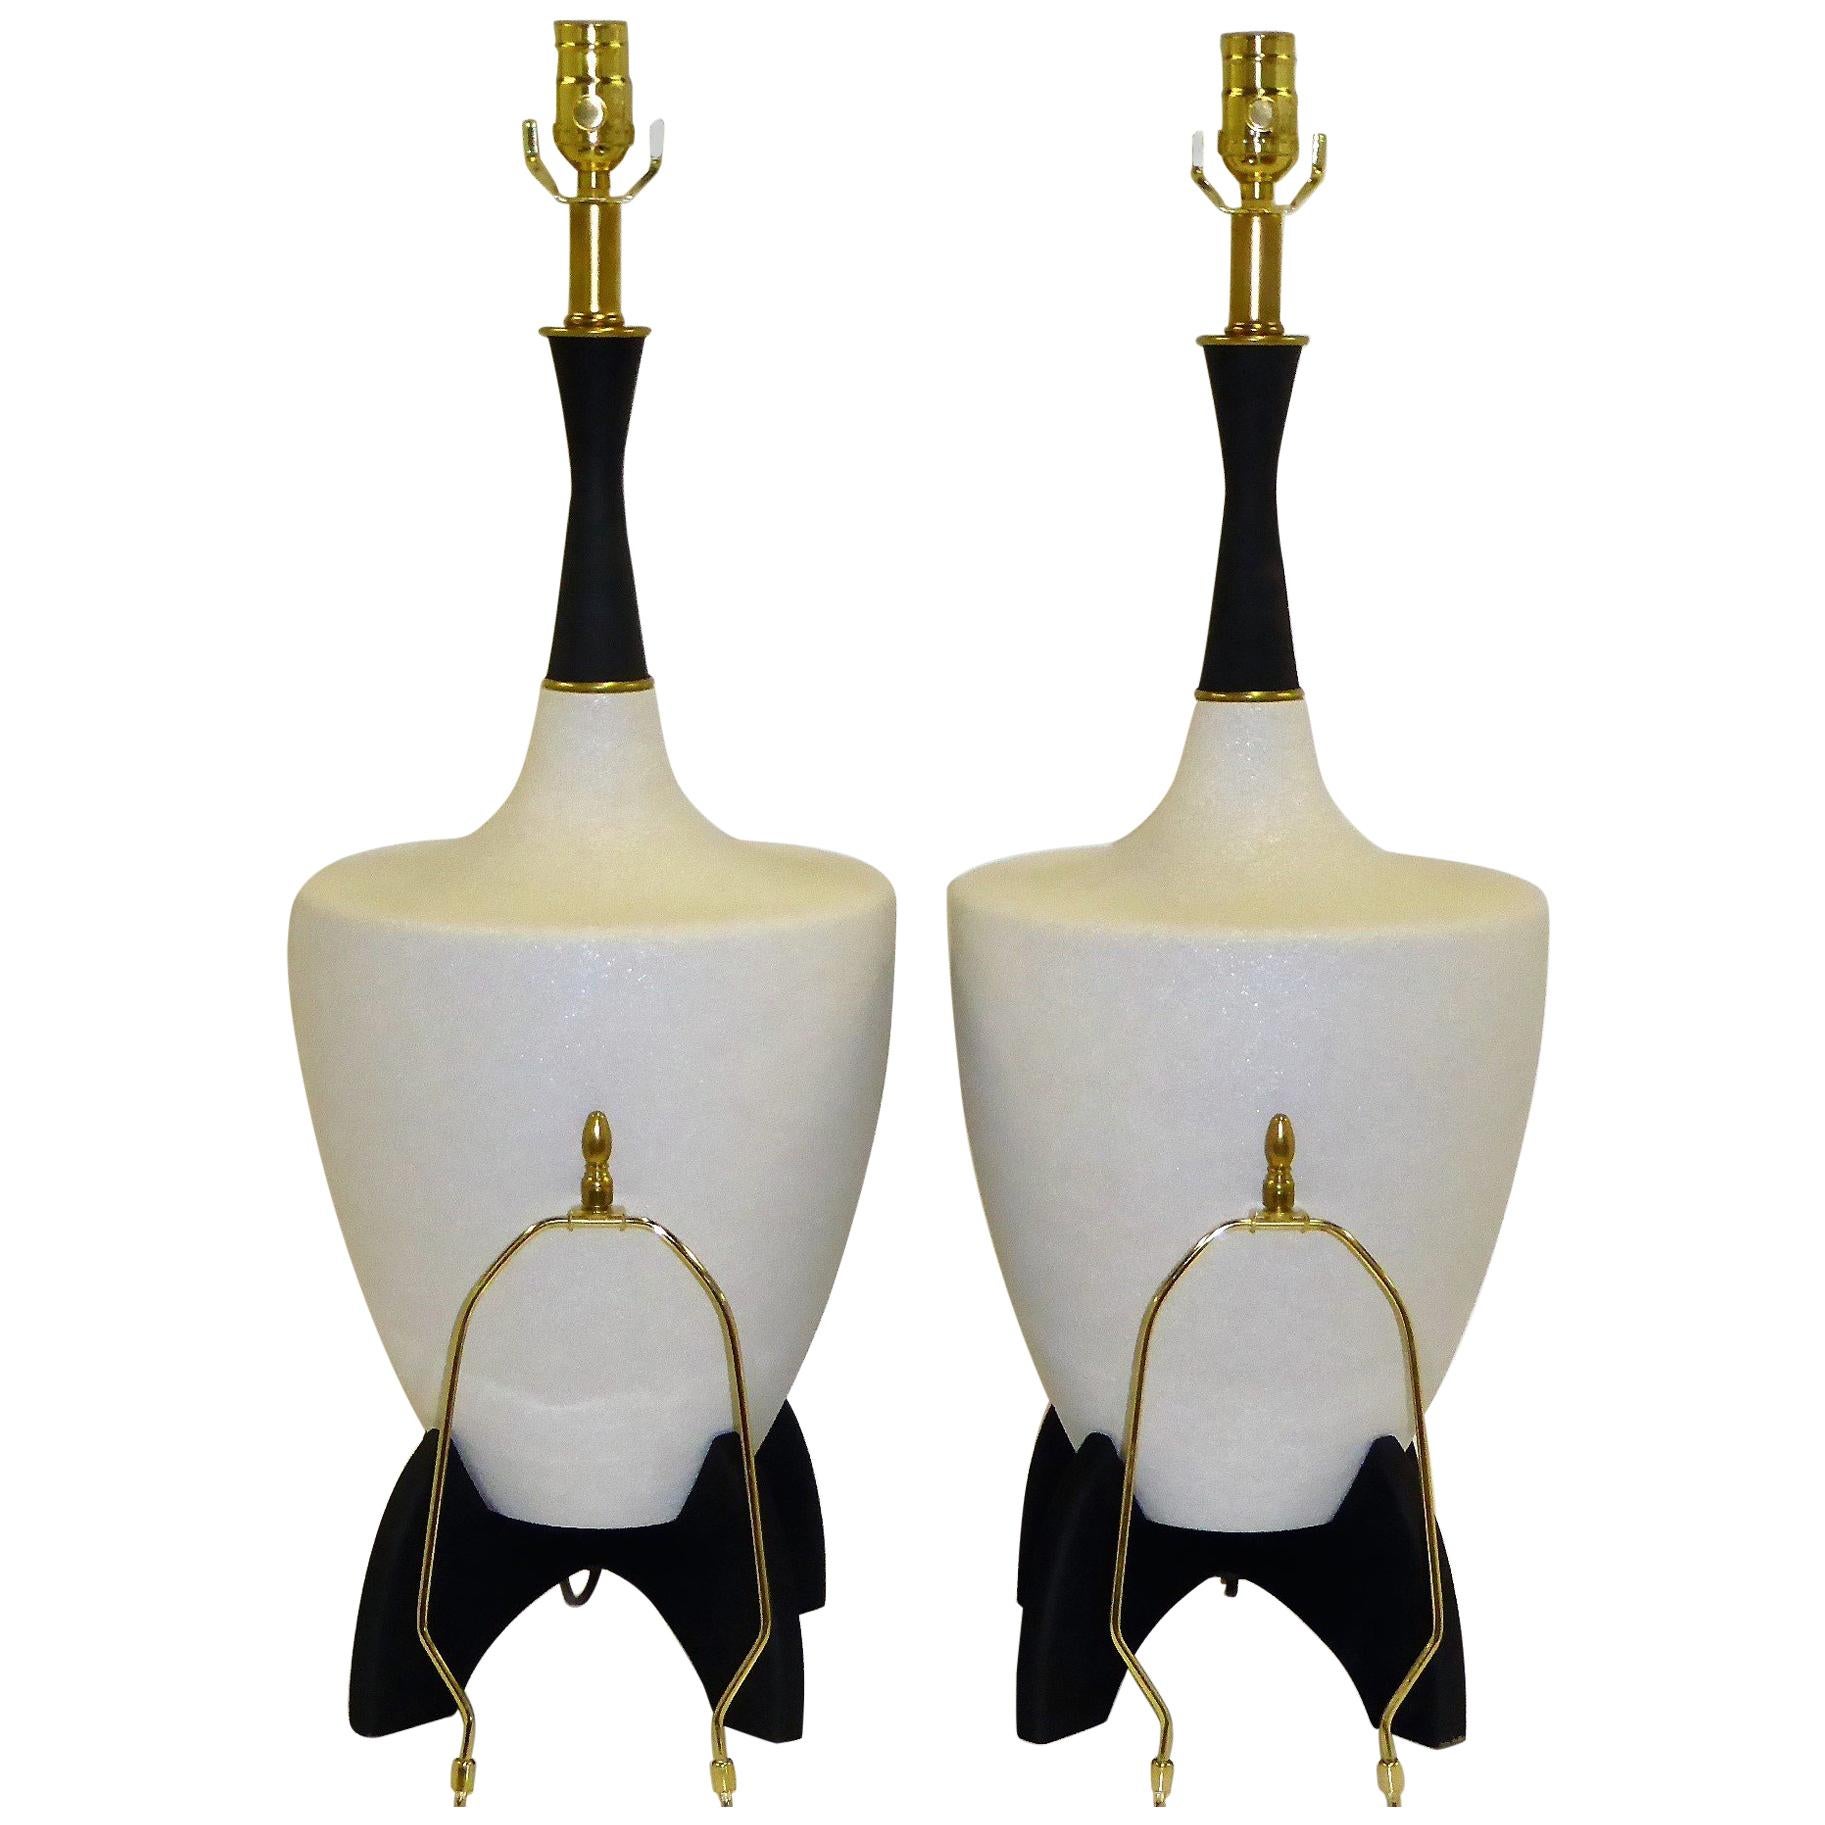 Pair of Modern Urn Shape Ceramic Table Lamps with Black Wood Stand and Neck